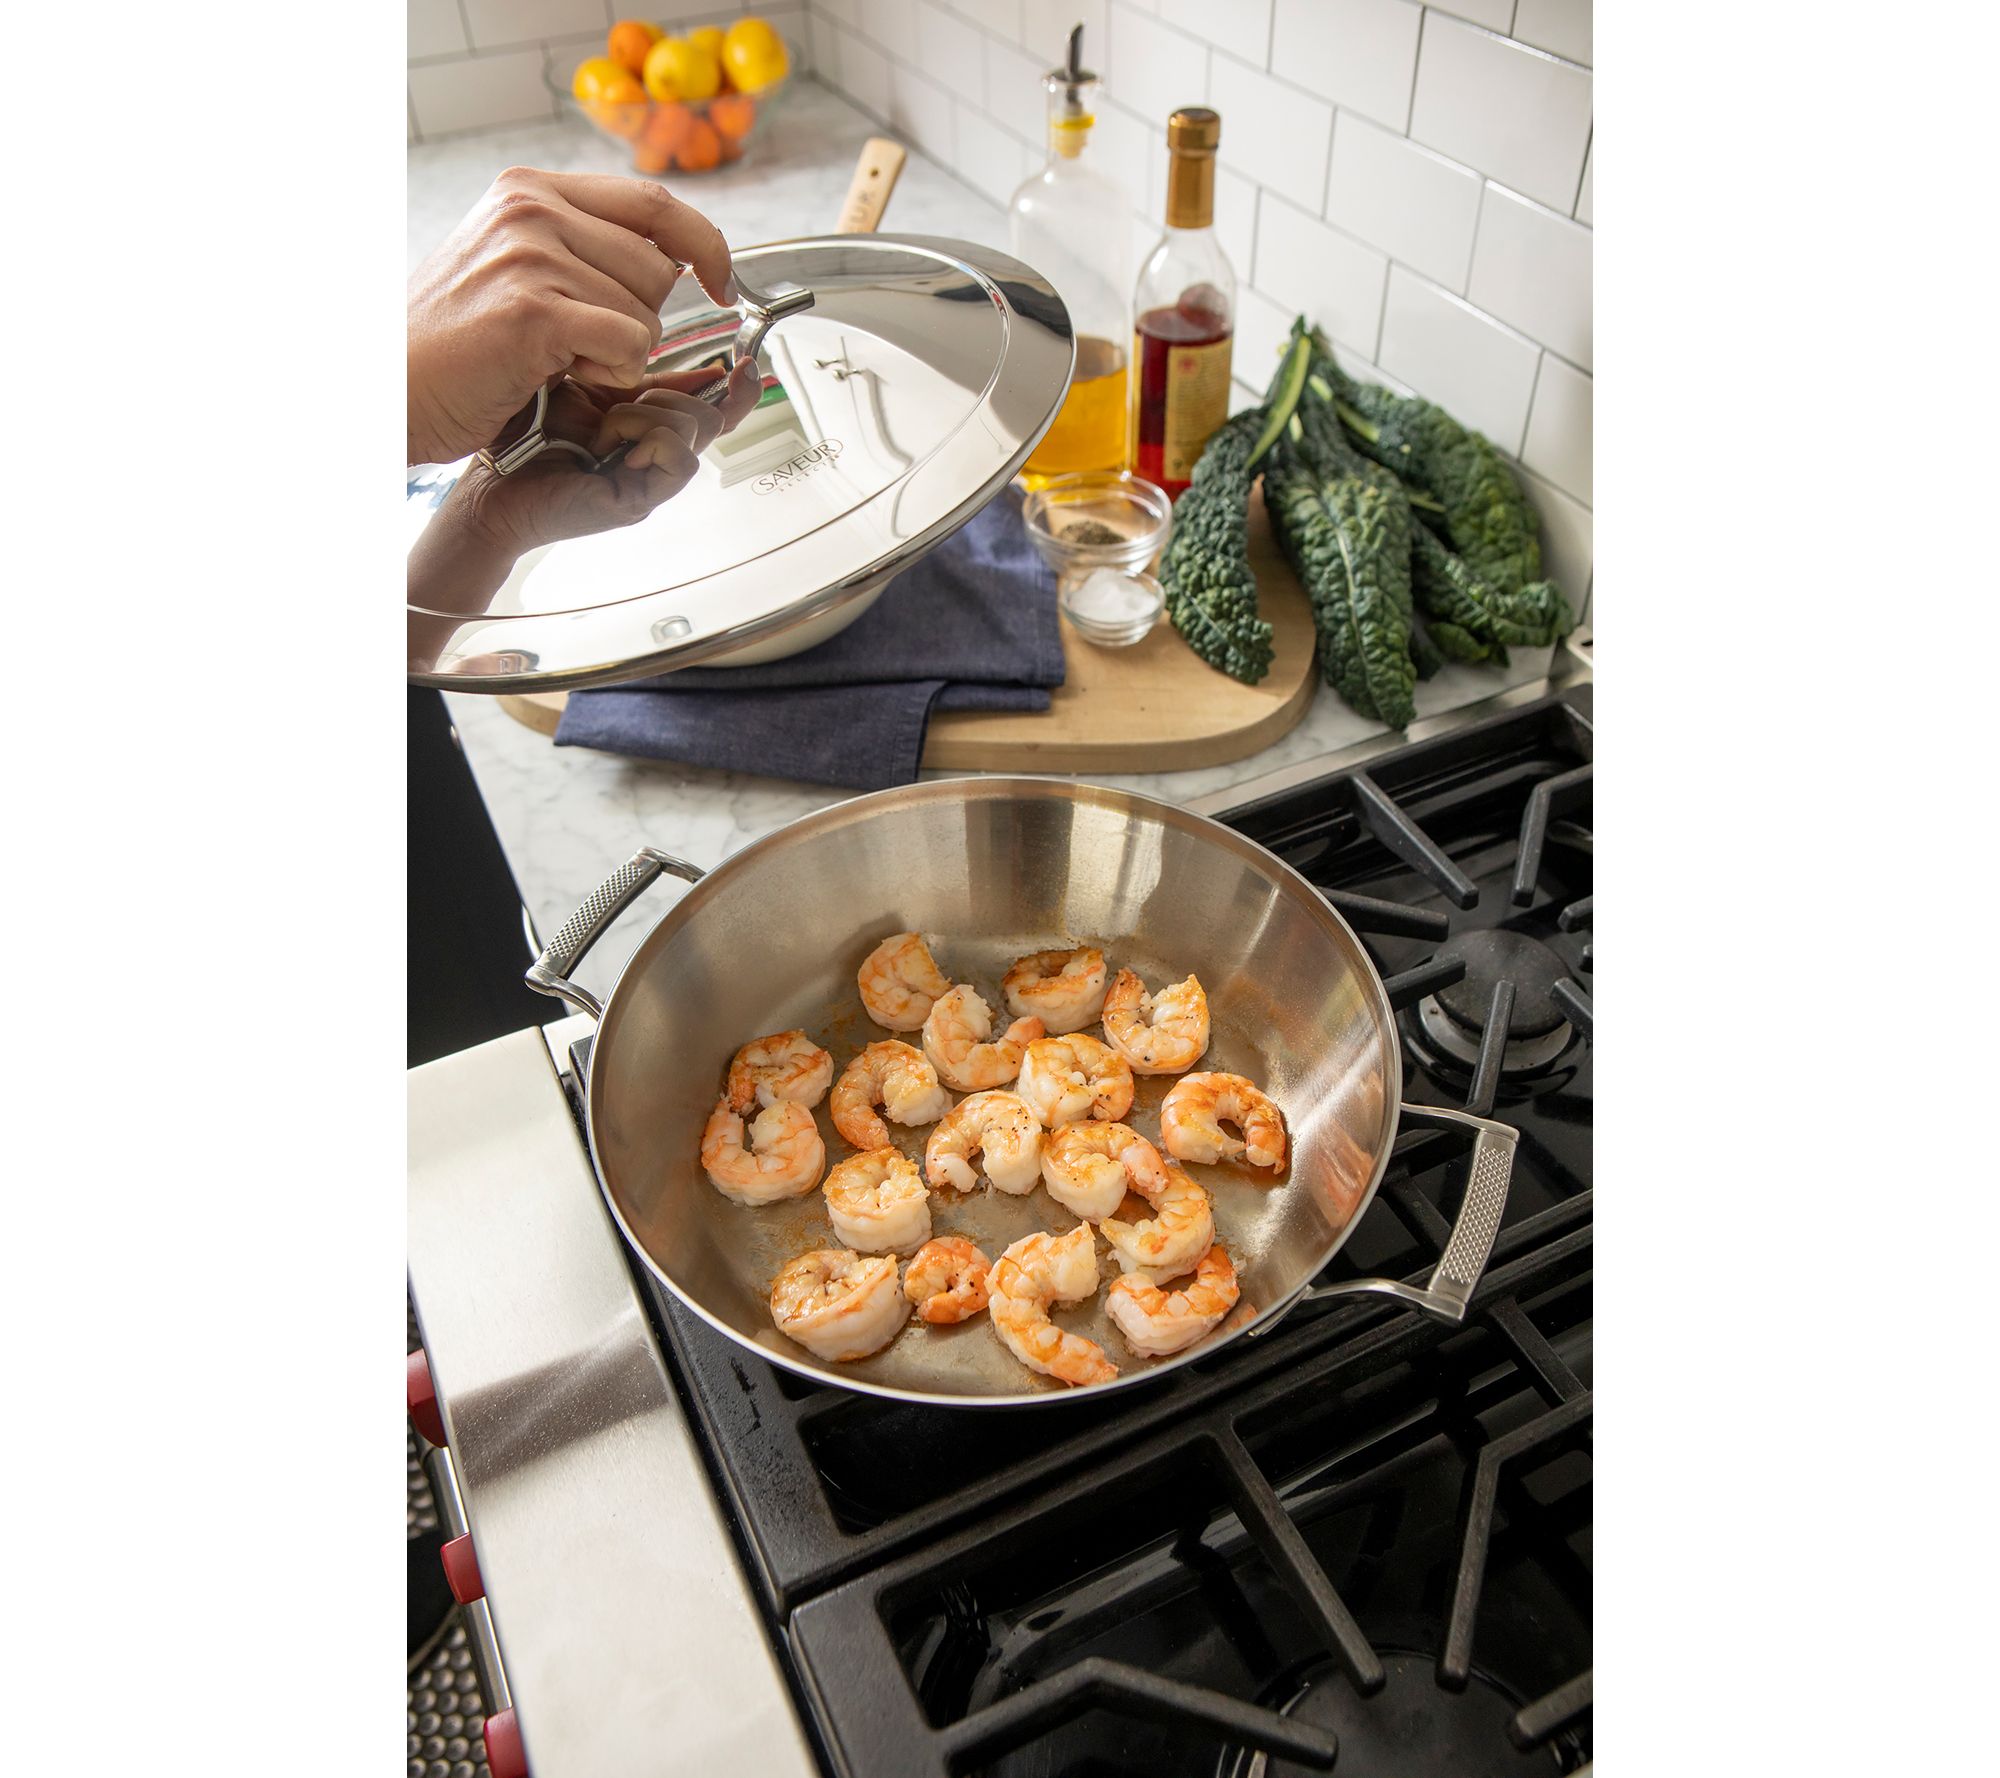 SAVEUR Selects Voyage Triply 12 inch Everyday Pan with Lid